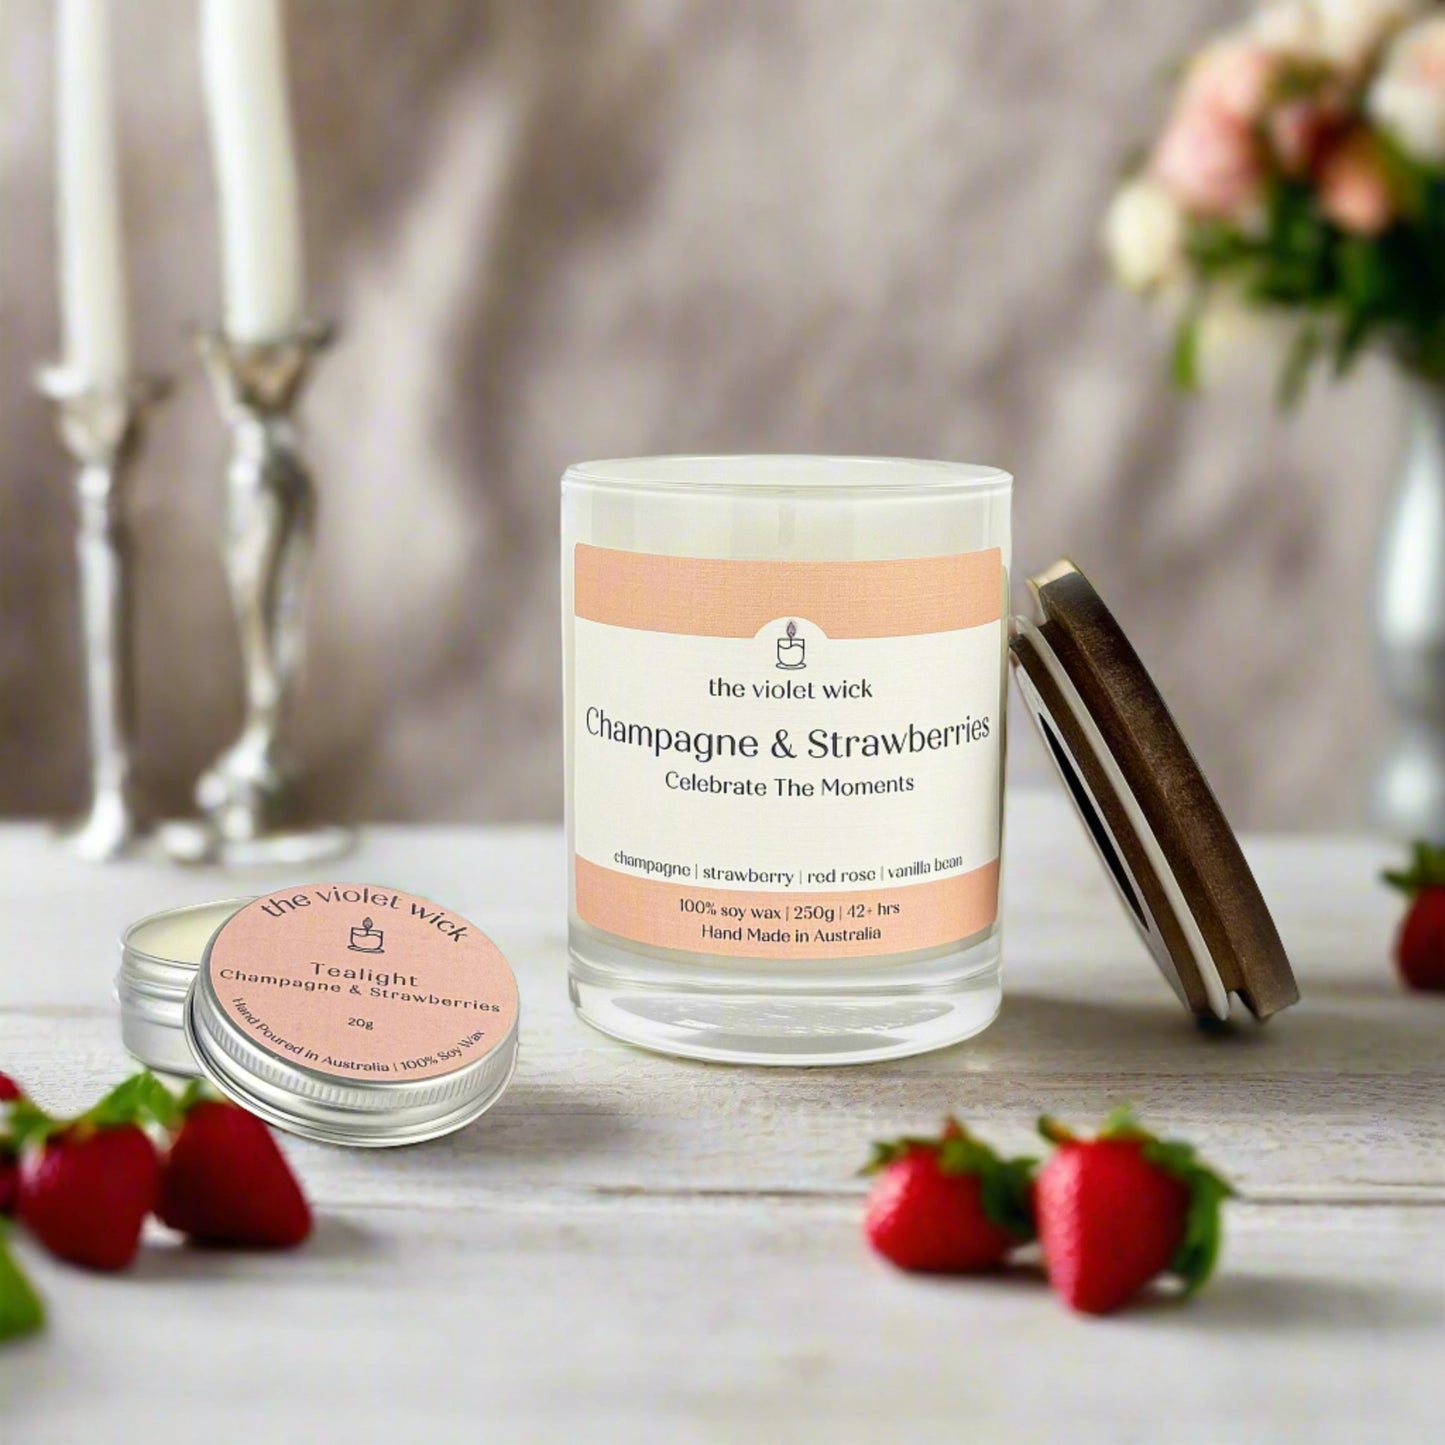 Champagne & Strawberries Soy candle and tealight from The Violet Wick